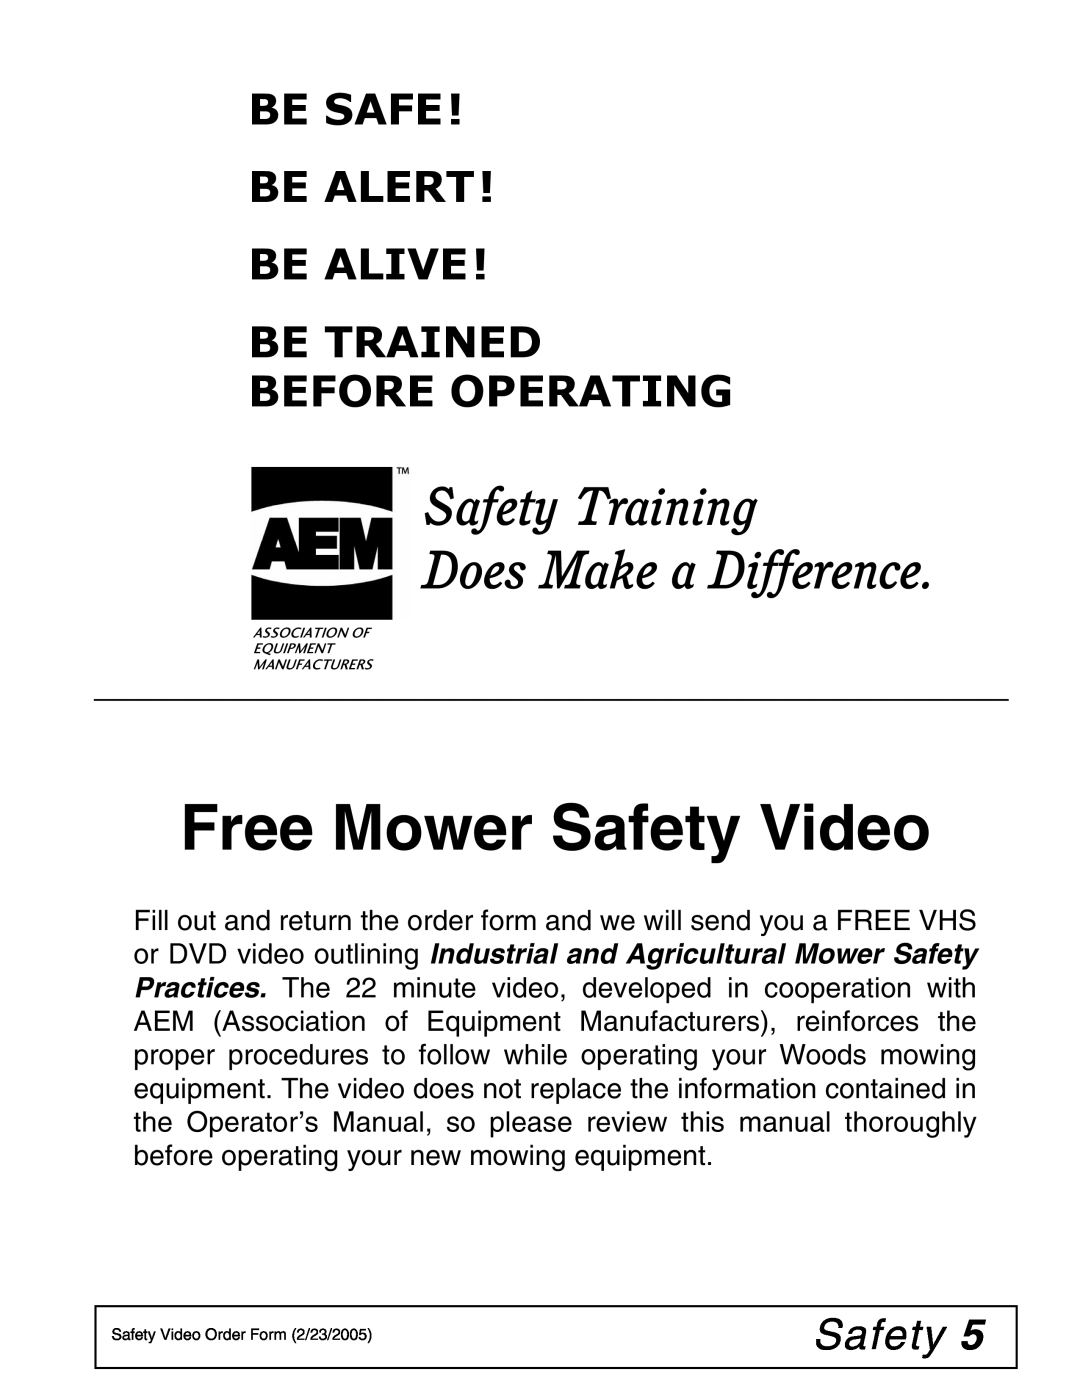 Woods Equipment MD80-2 manual Free Mower Safety Video, Safety Training Does Make a Difference, Before Operating 